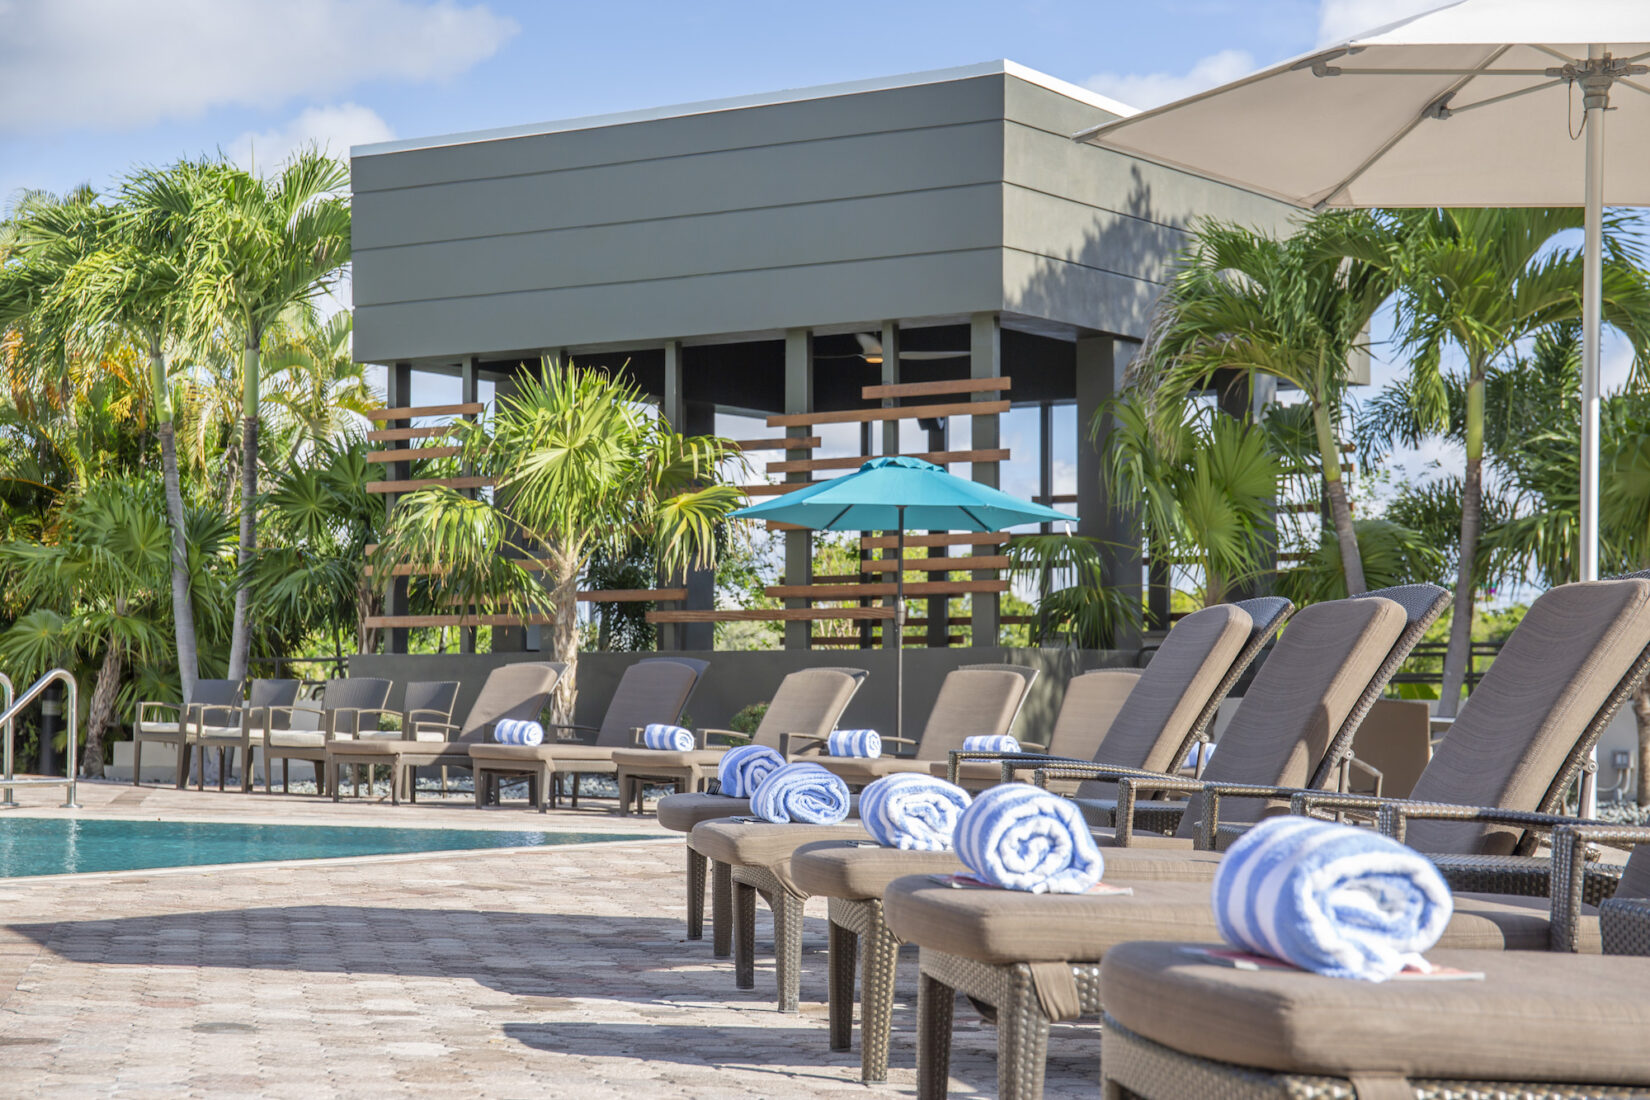 Hotel pool deck with folded towels on each lounge chair